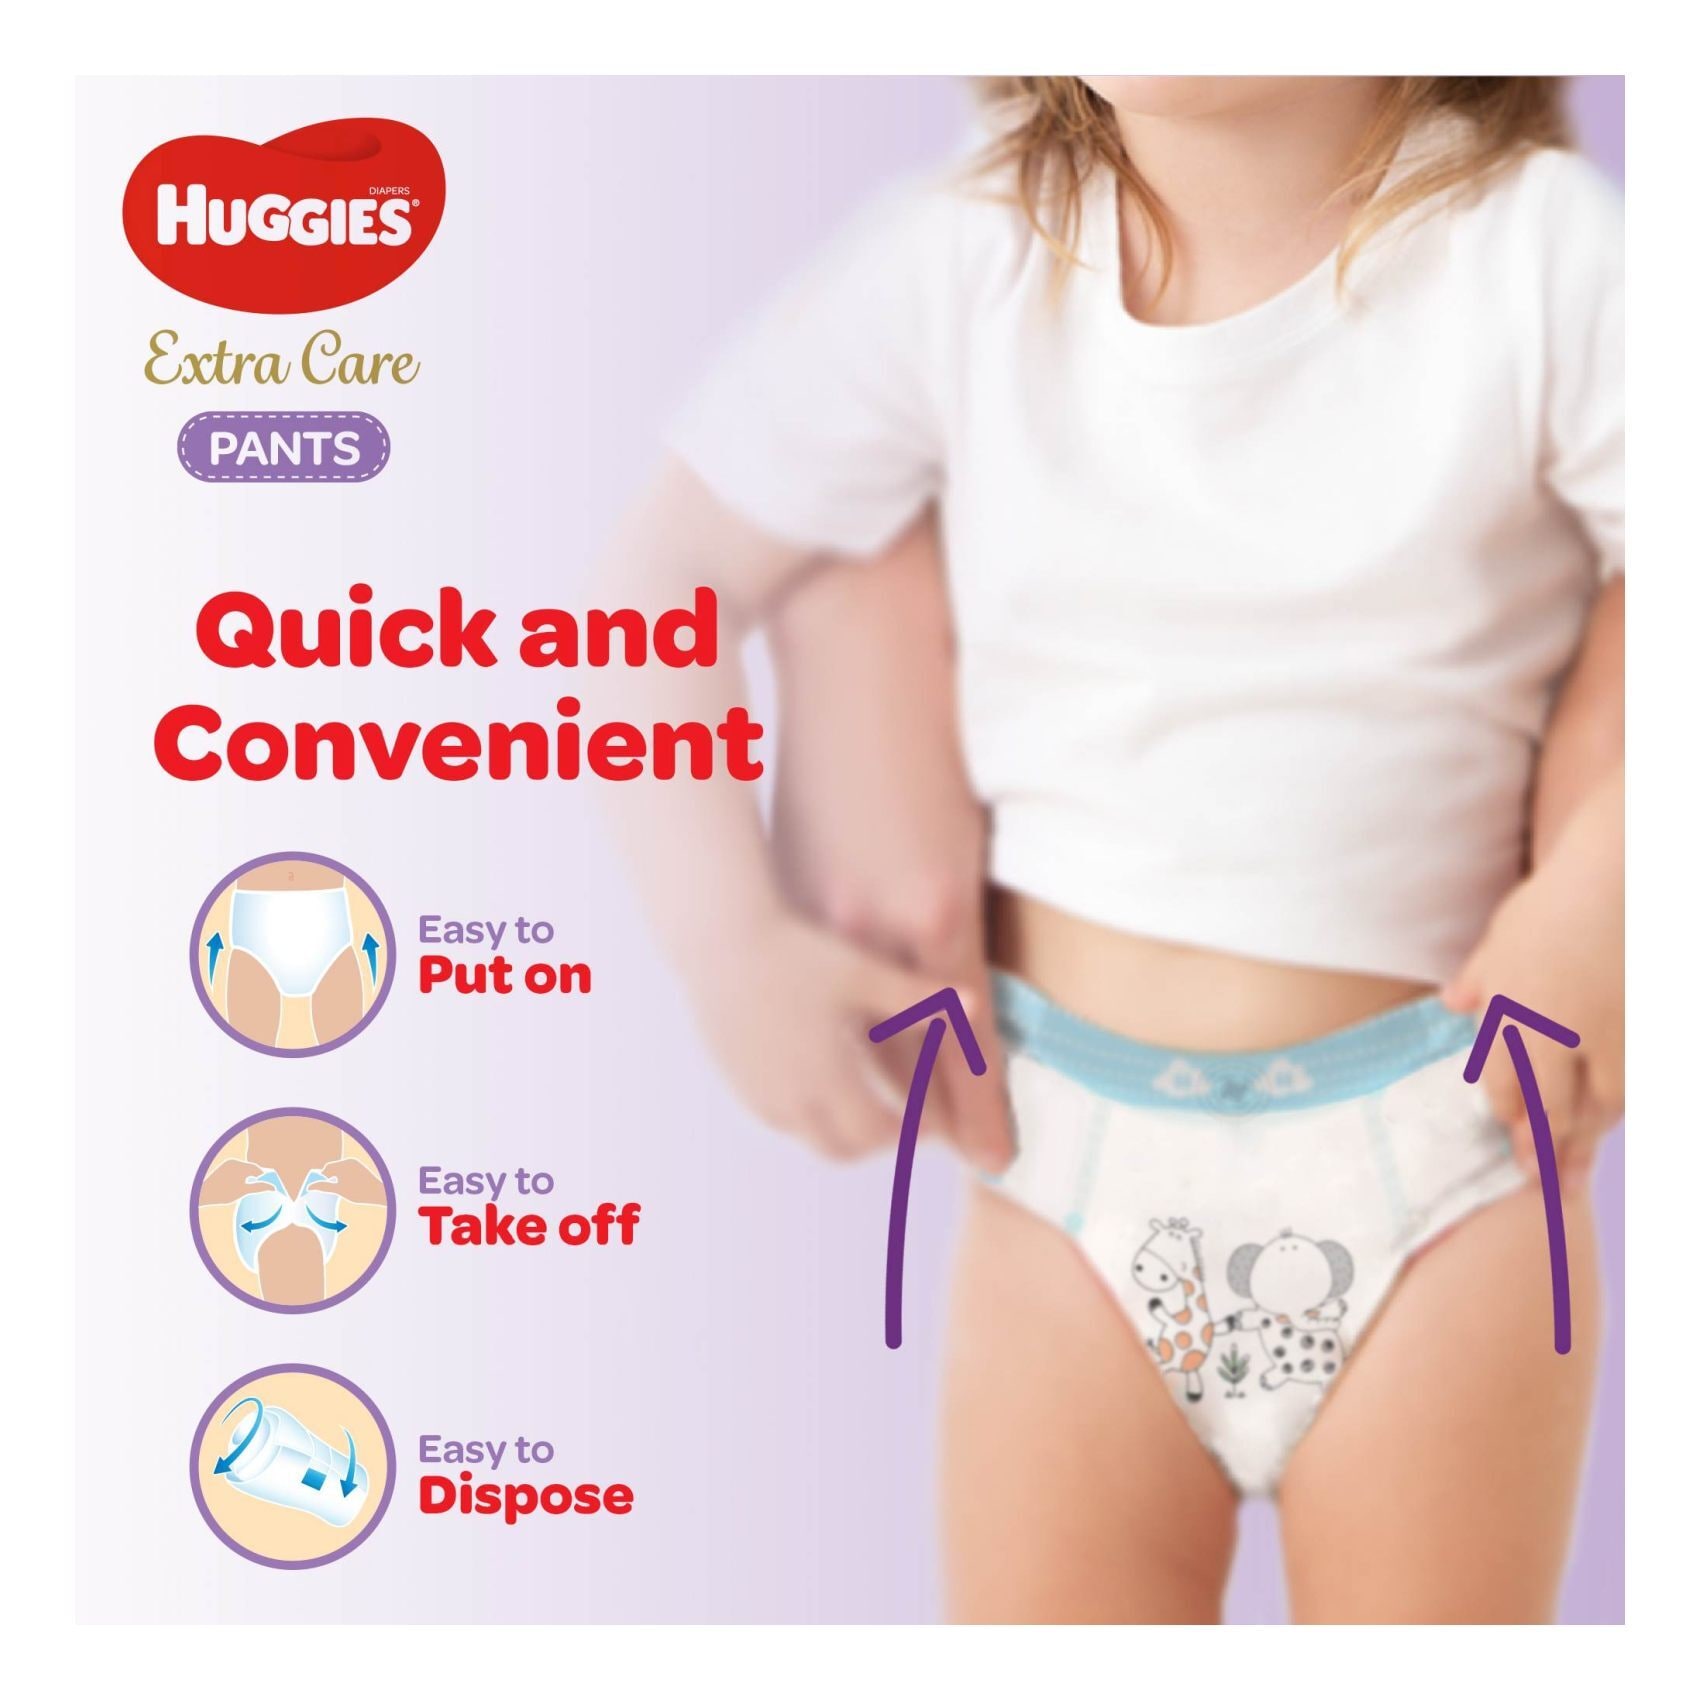 Buy Huggies Extra Care Culottes Size 5 12-17 kg 34 Diaper Pants